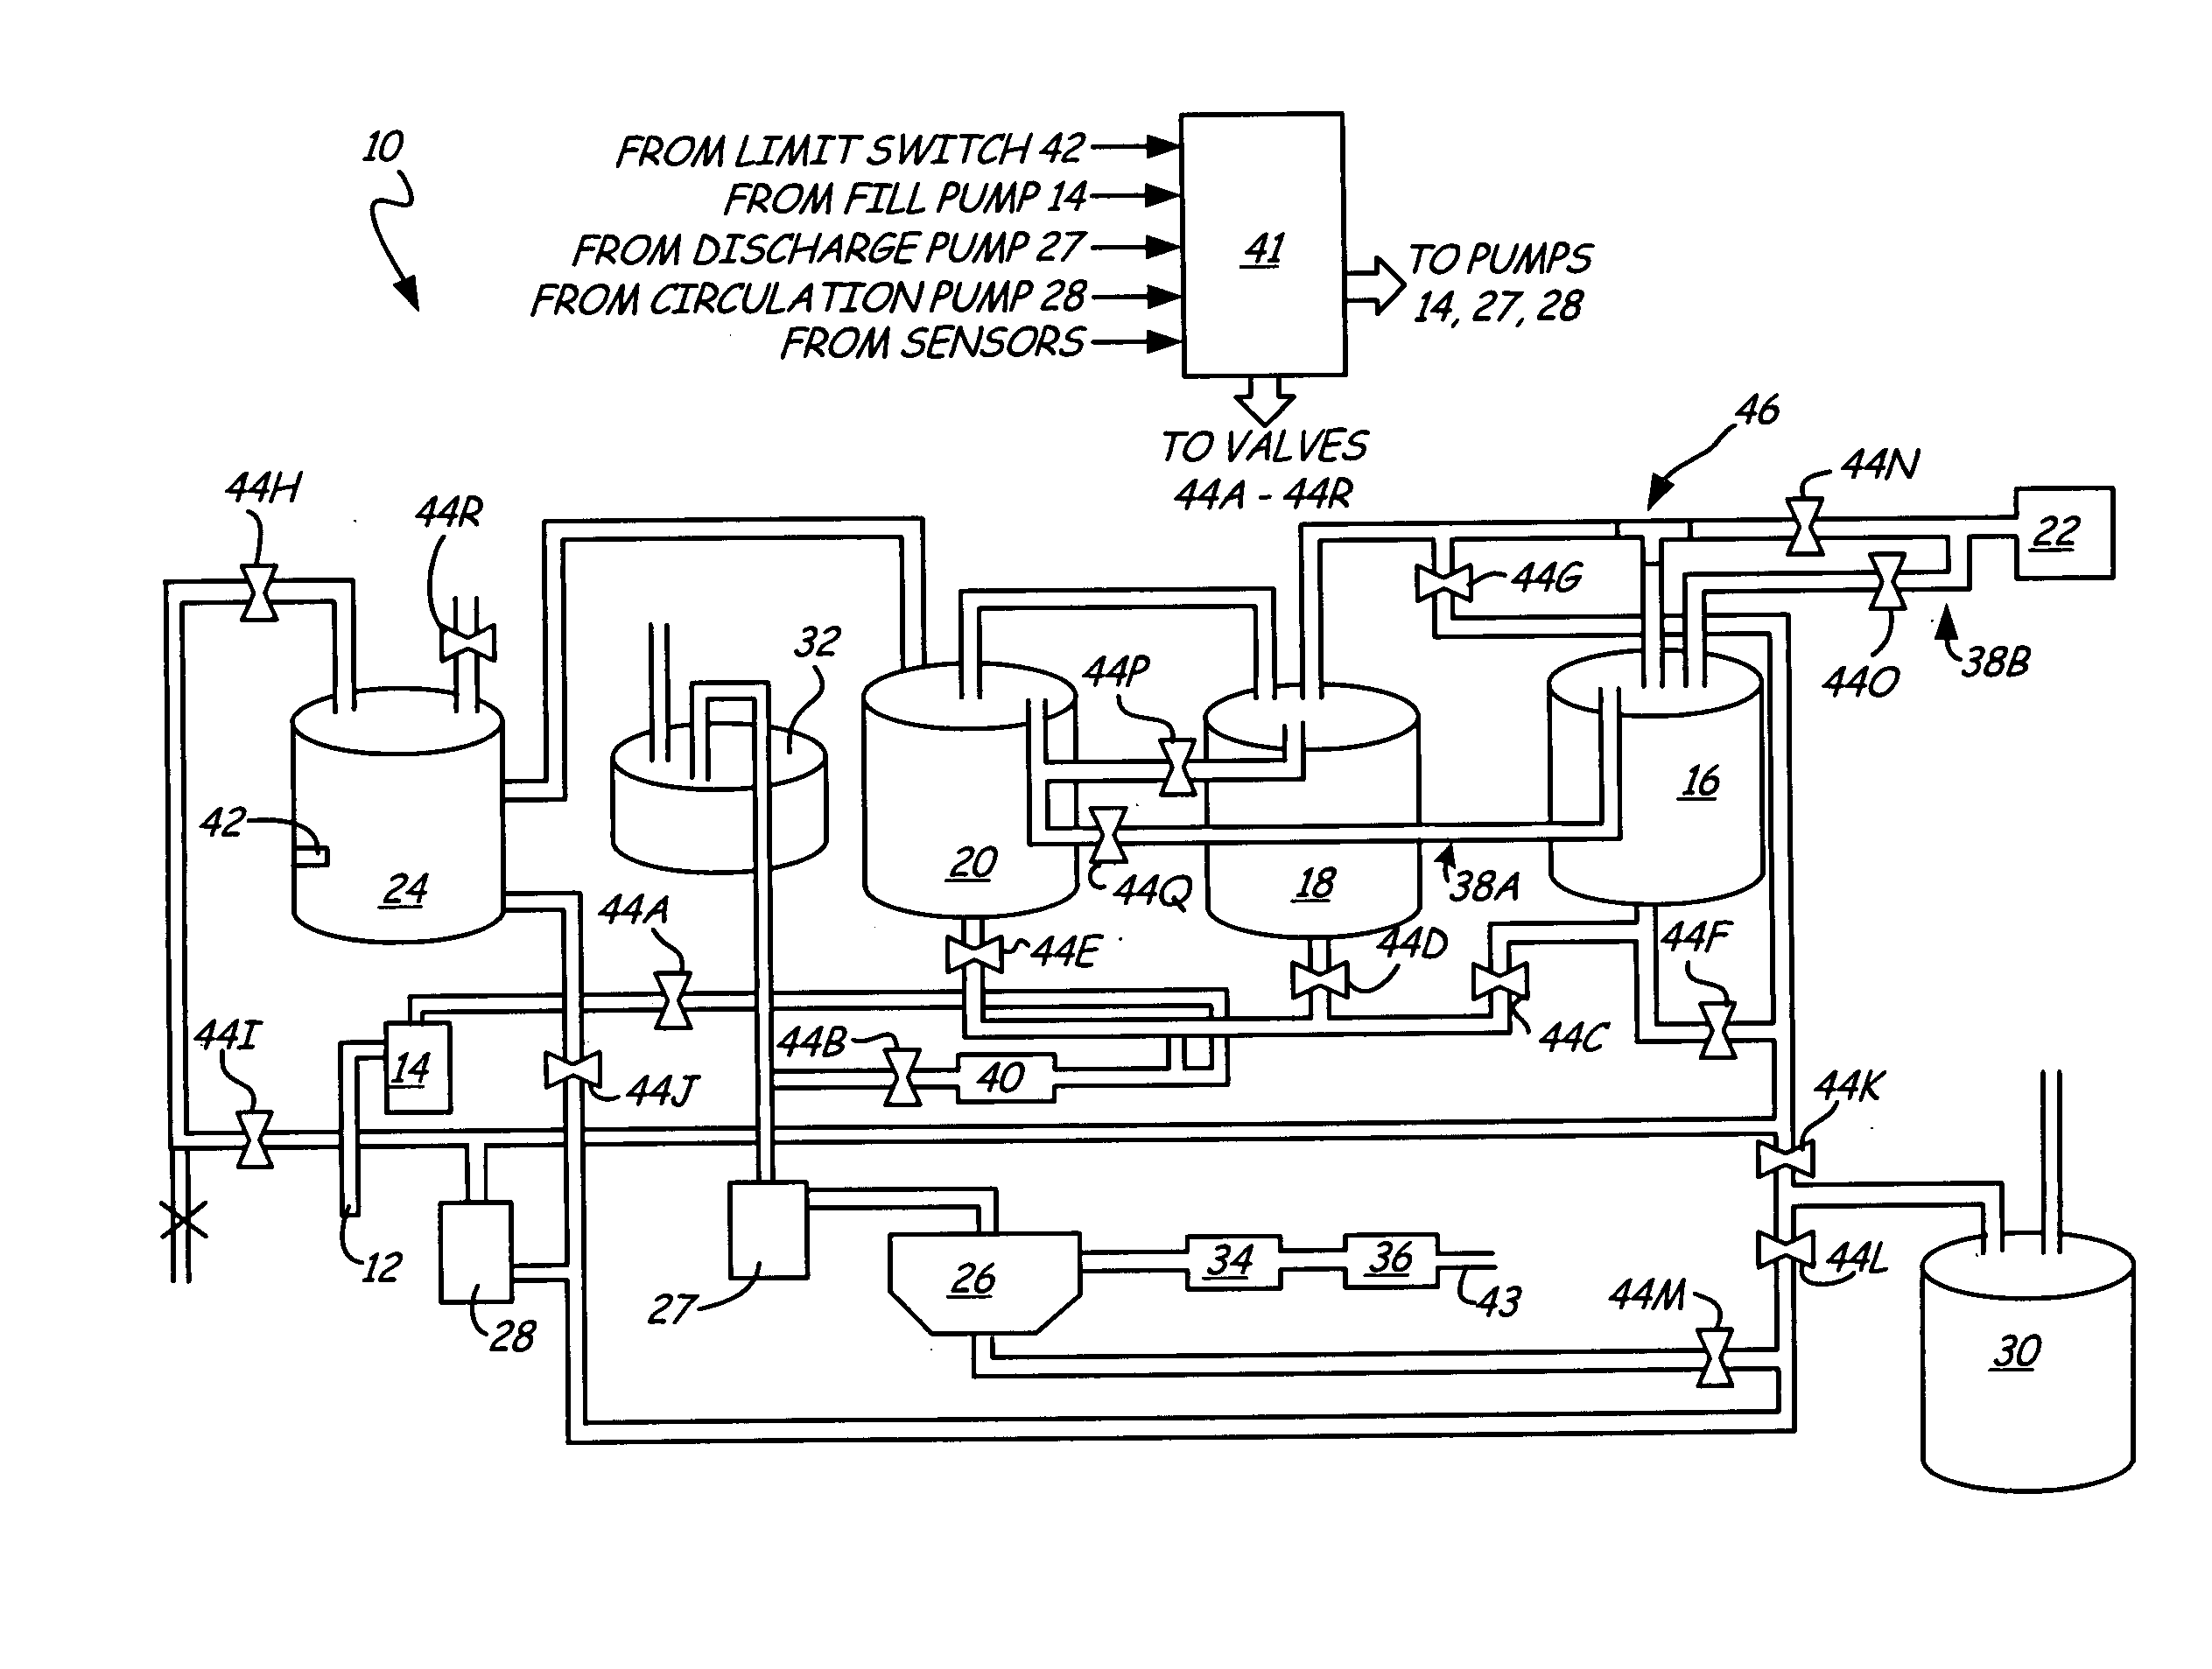 System and method for treating wastewater